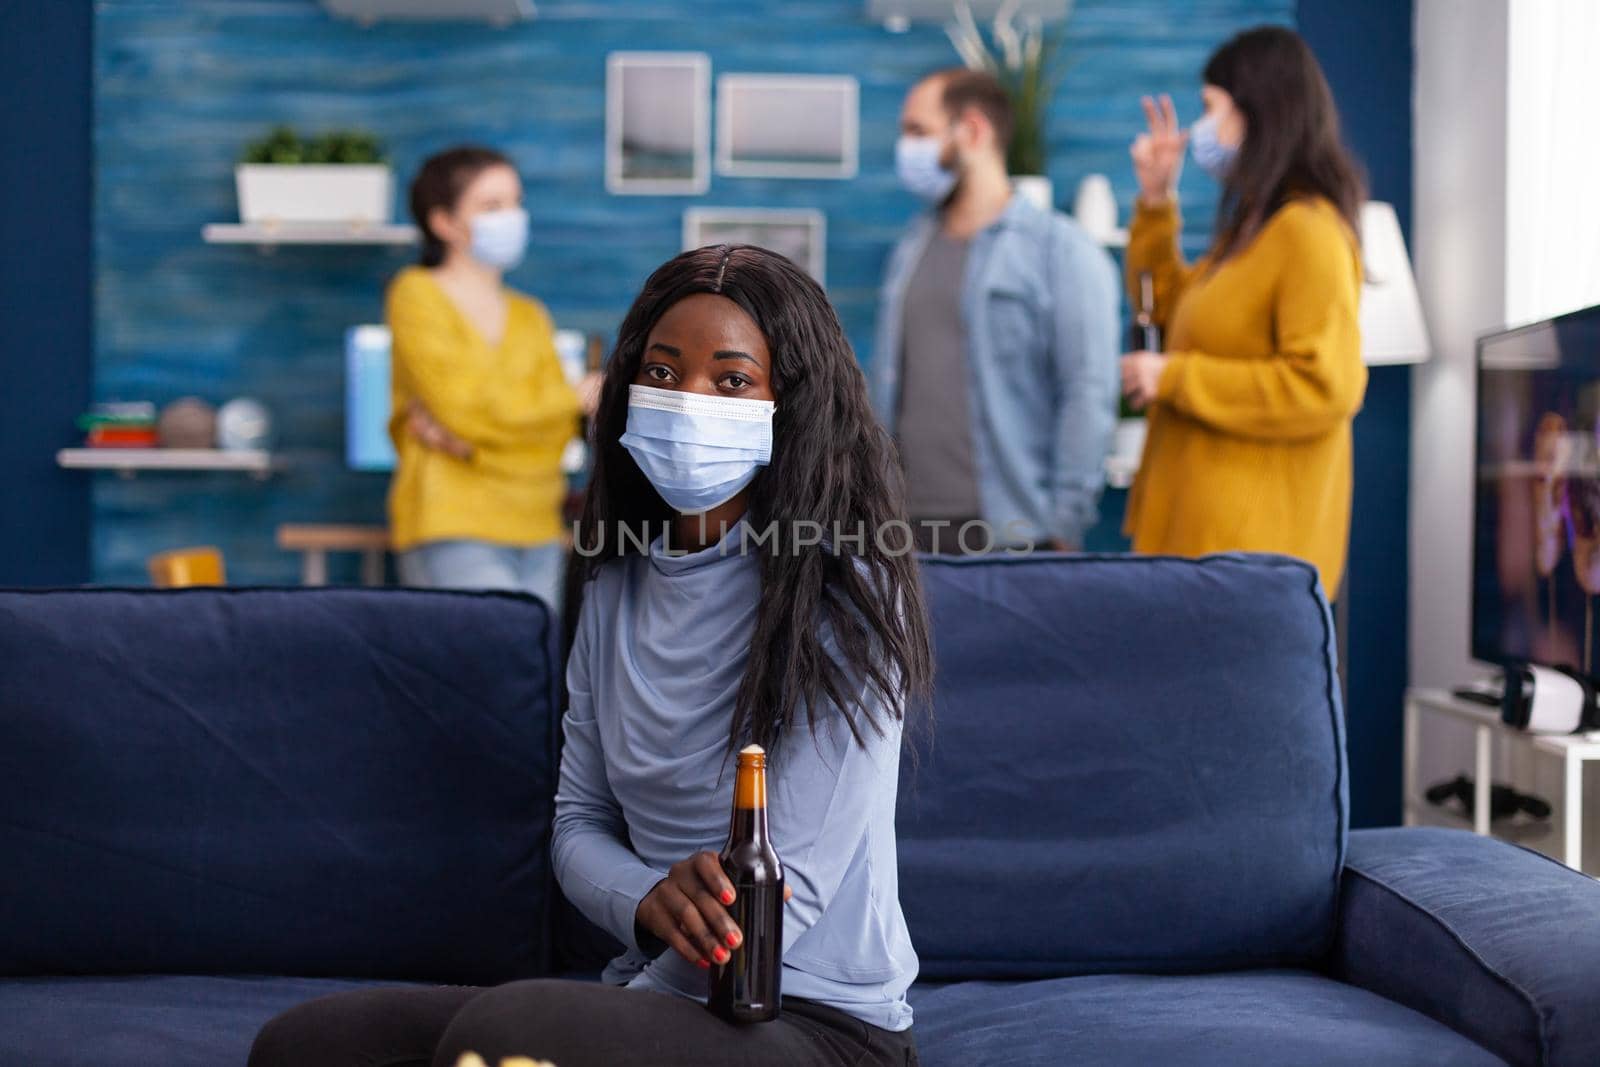 African woman keeping social distancing wearing face mask while meeting with friends to prevent spread of coronavirus holding beer bottle looking at camera sitting on couch. Conceptual image.